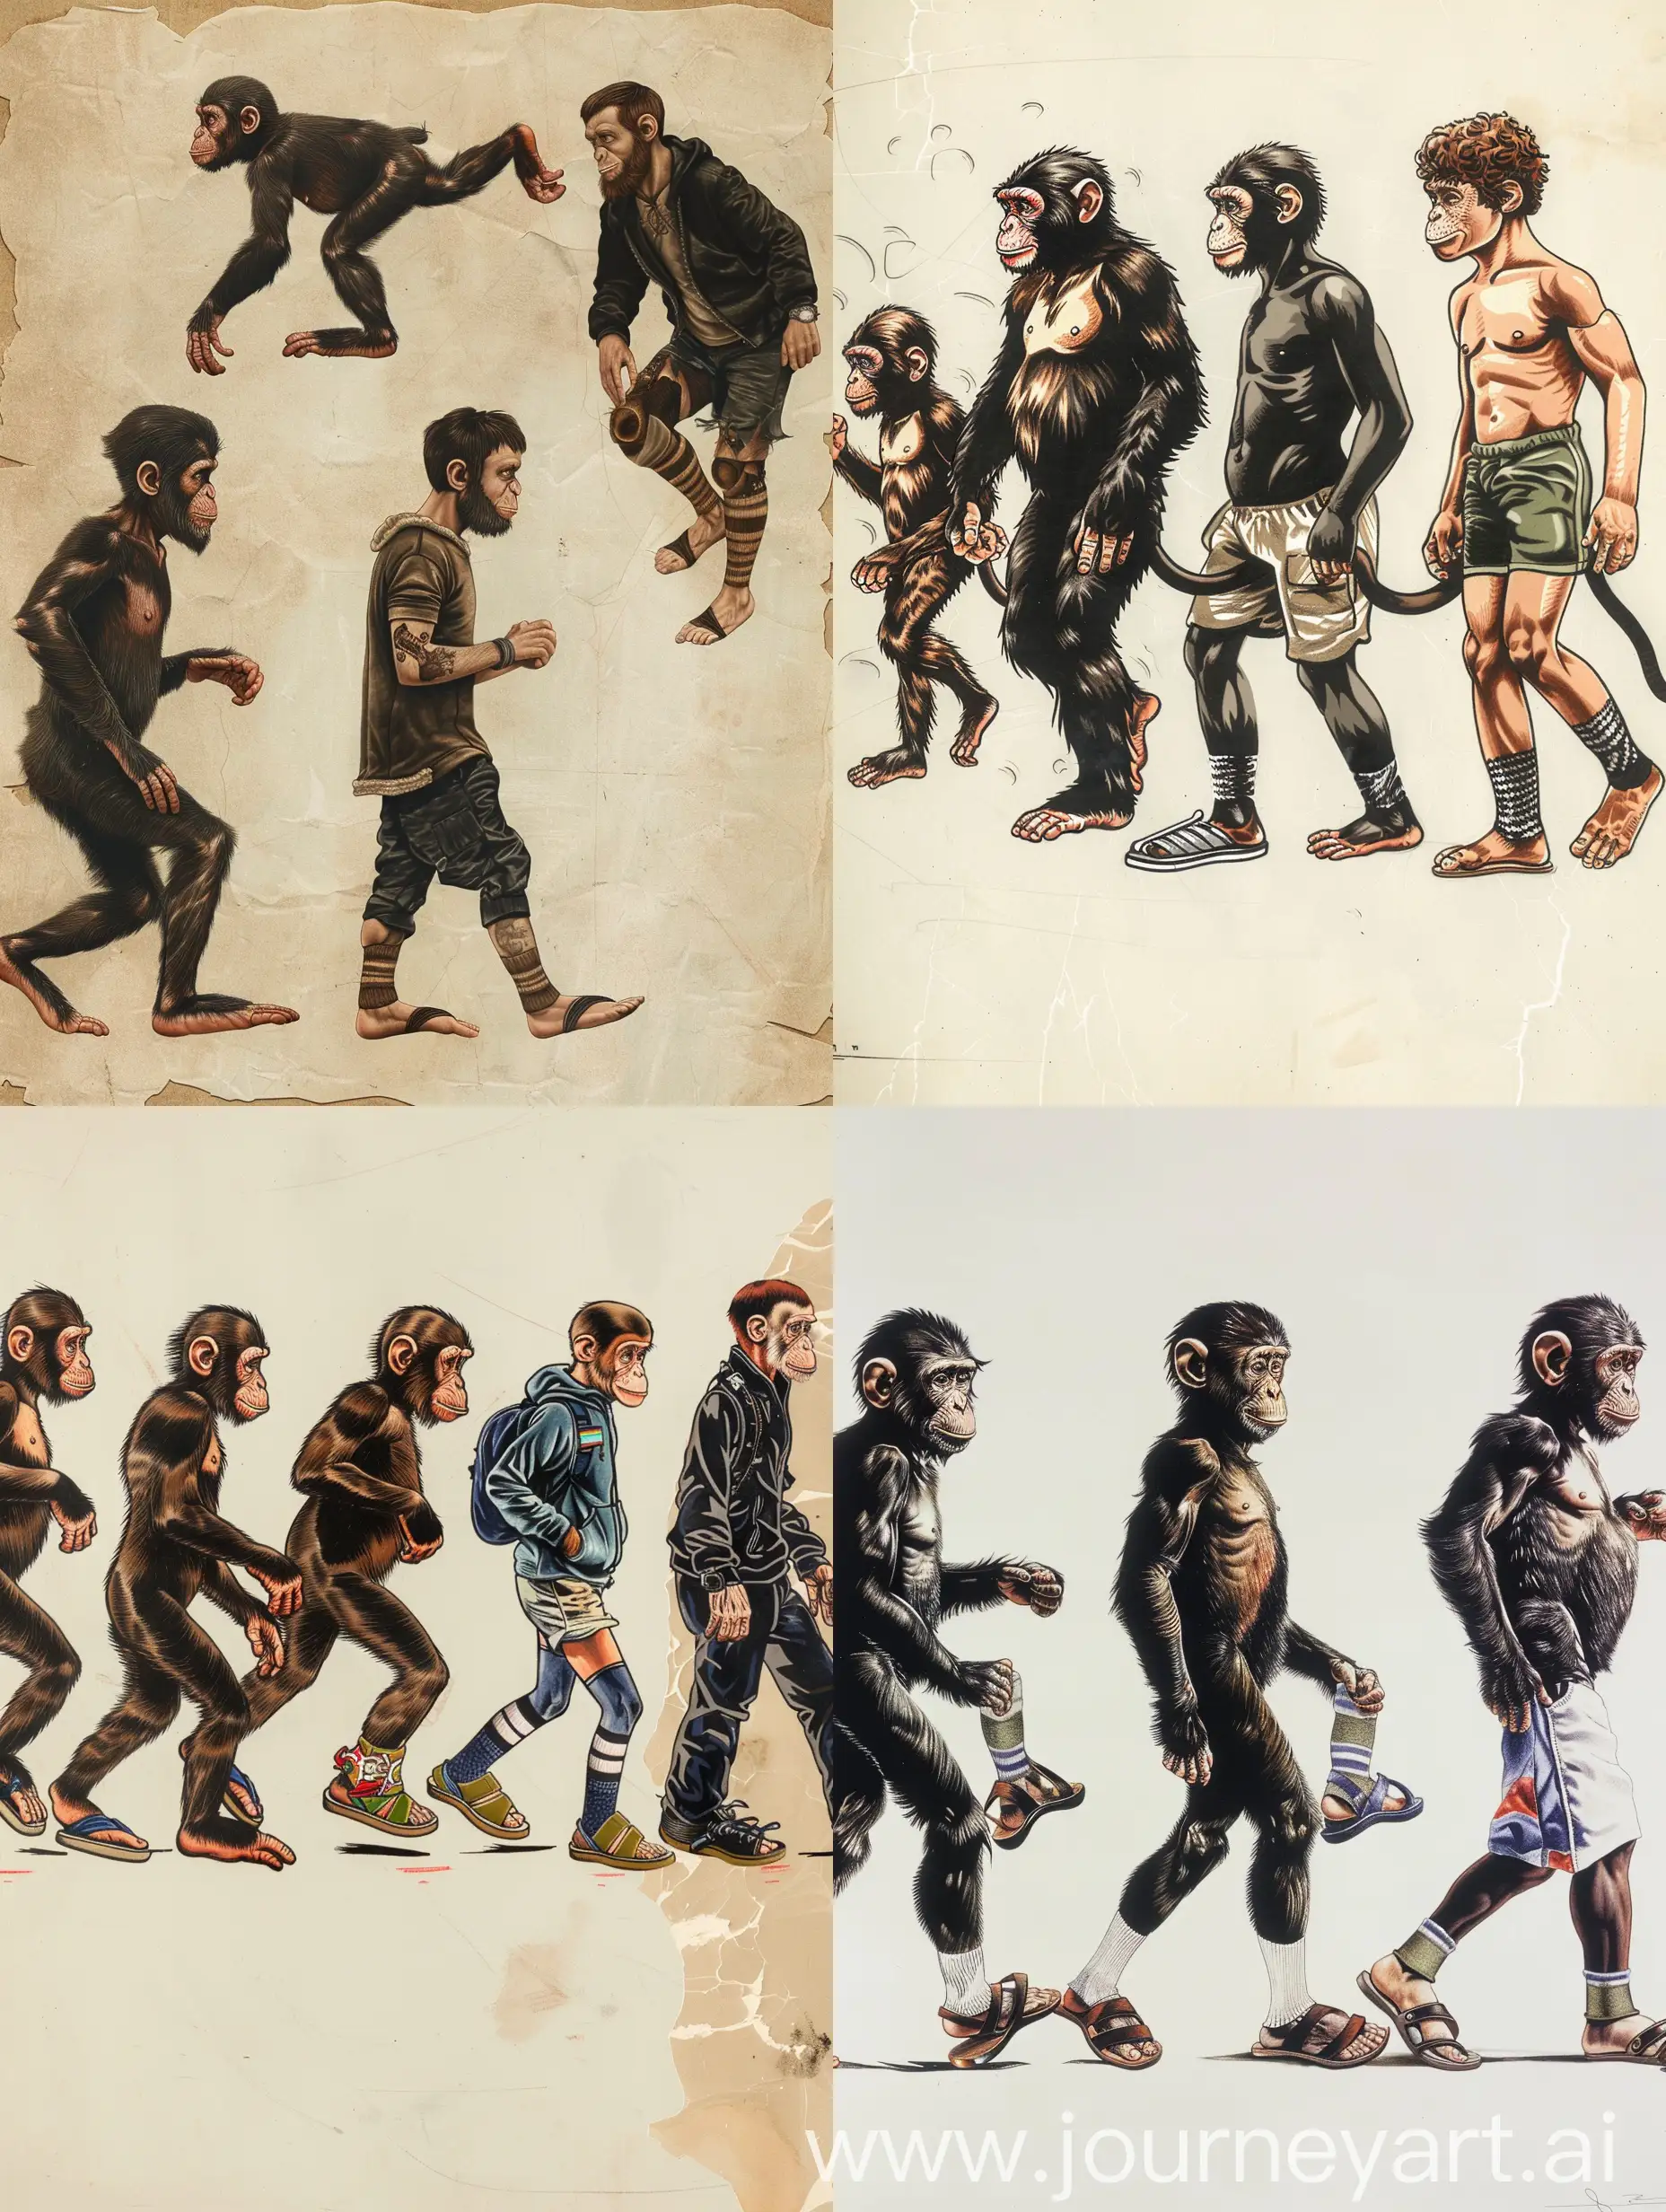 Human-Evolution-Journey-From-Monkey-to-Young-Man-in-Sandals-and-Socks